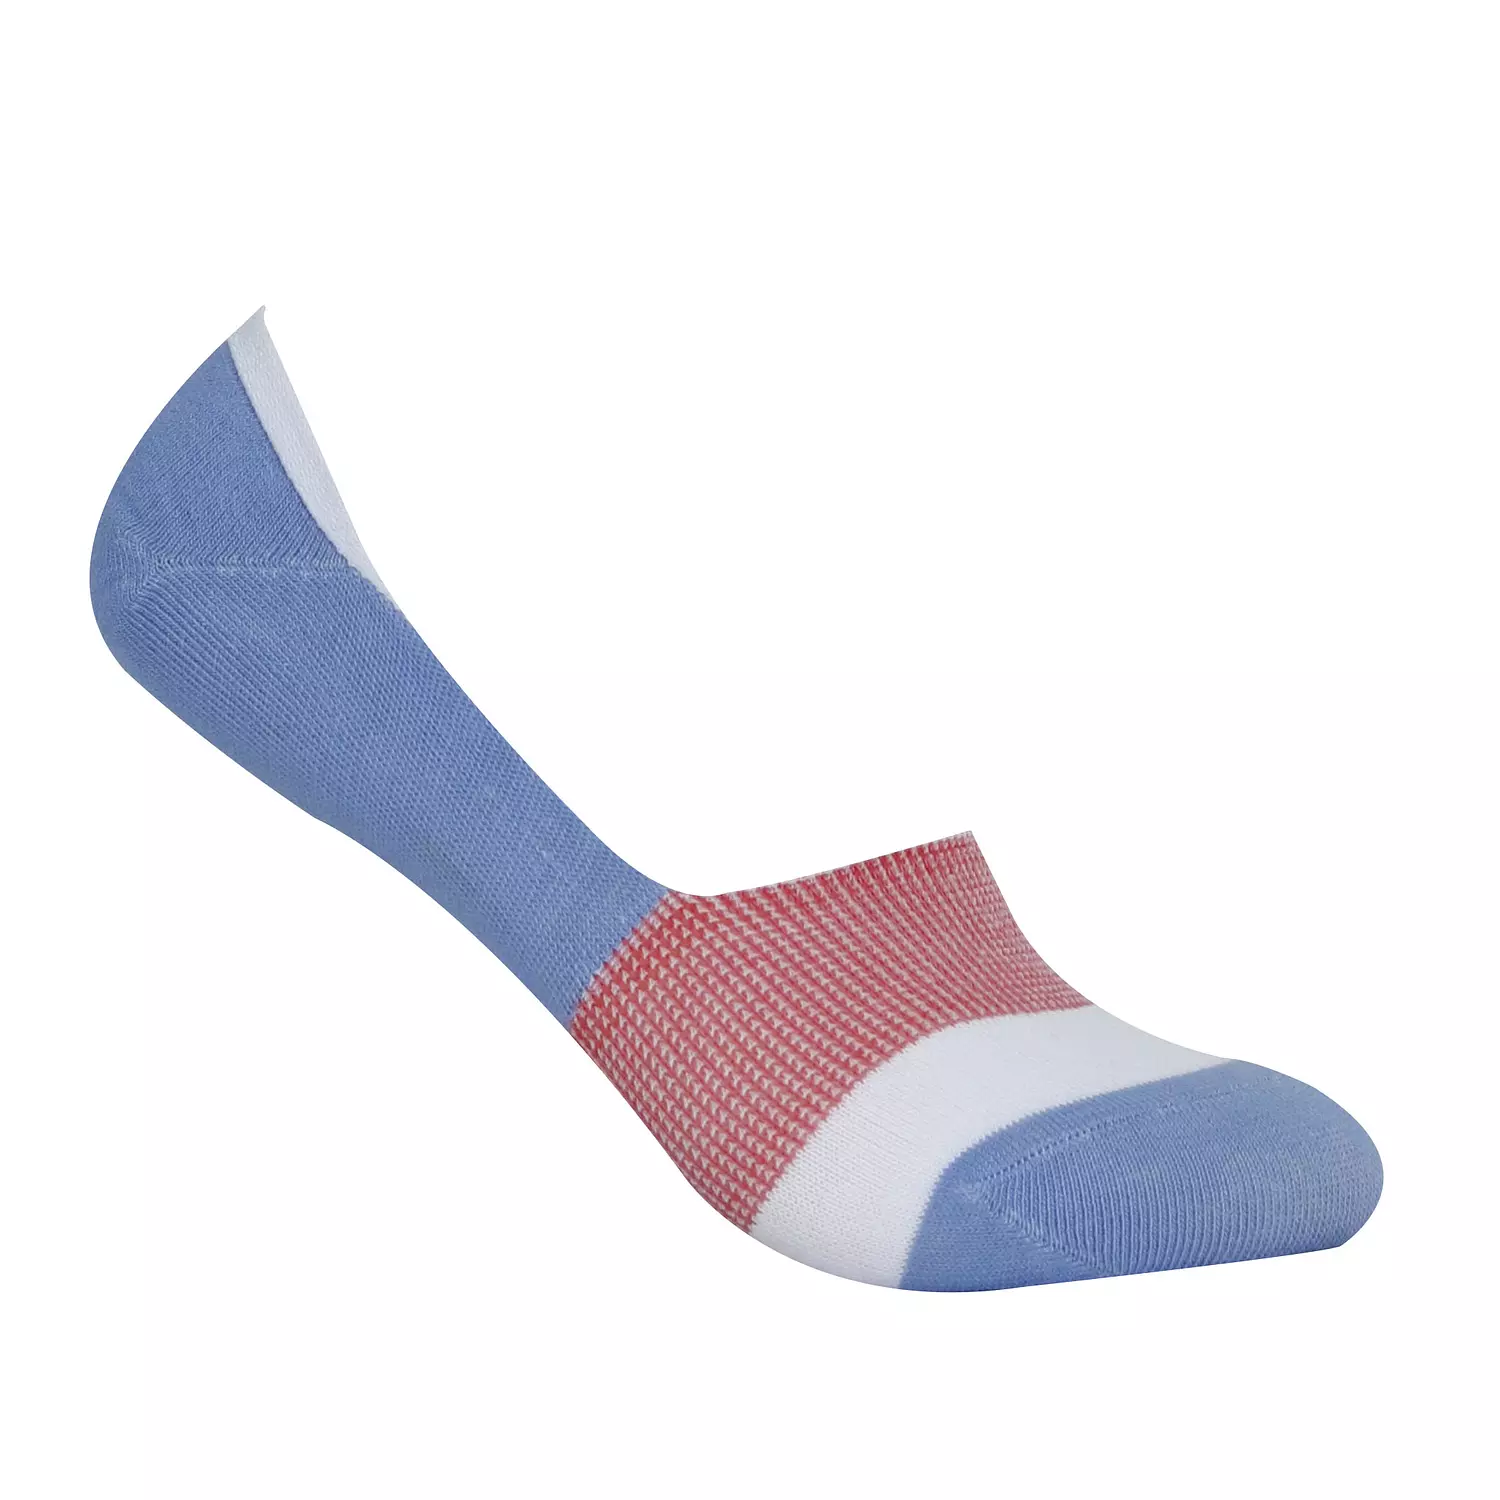 Viva invisible Sock for women's hover image